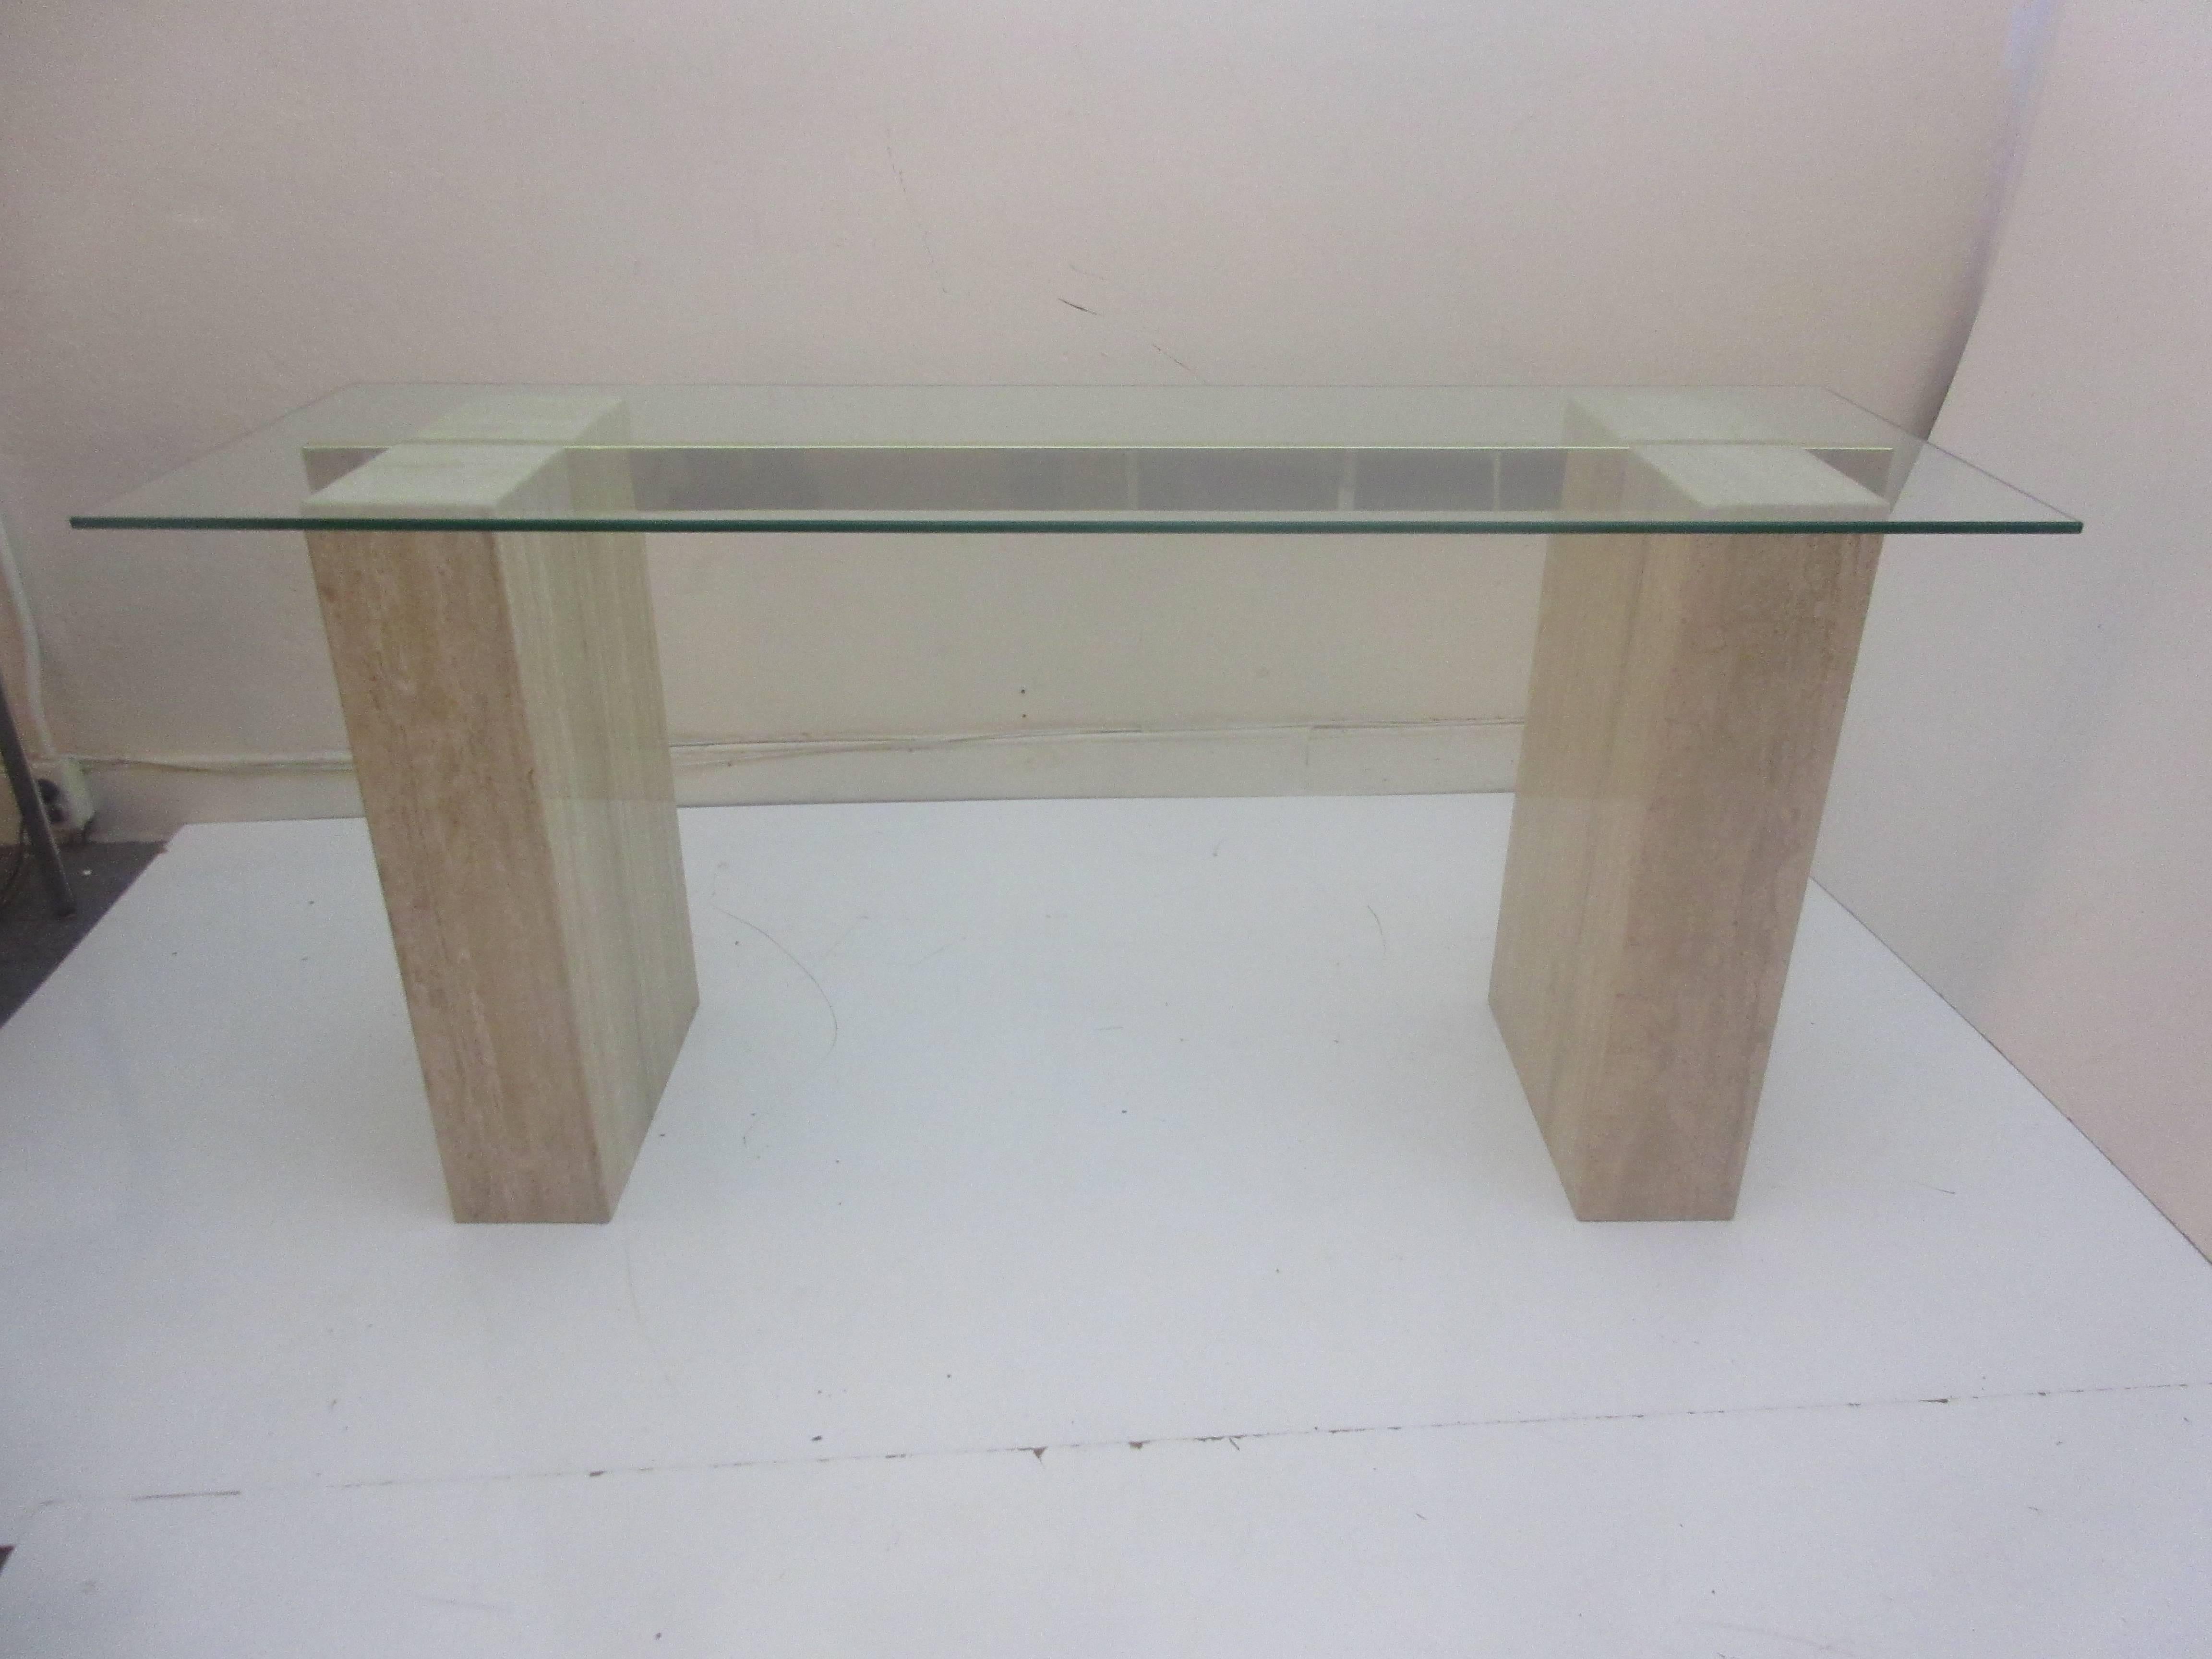 Artendi console table in travertine brass and glass. Elegant console in durable material that can get wet without damage.